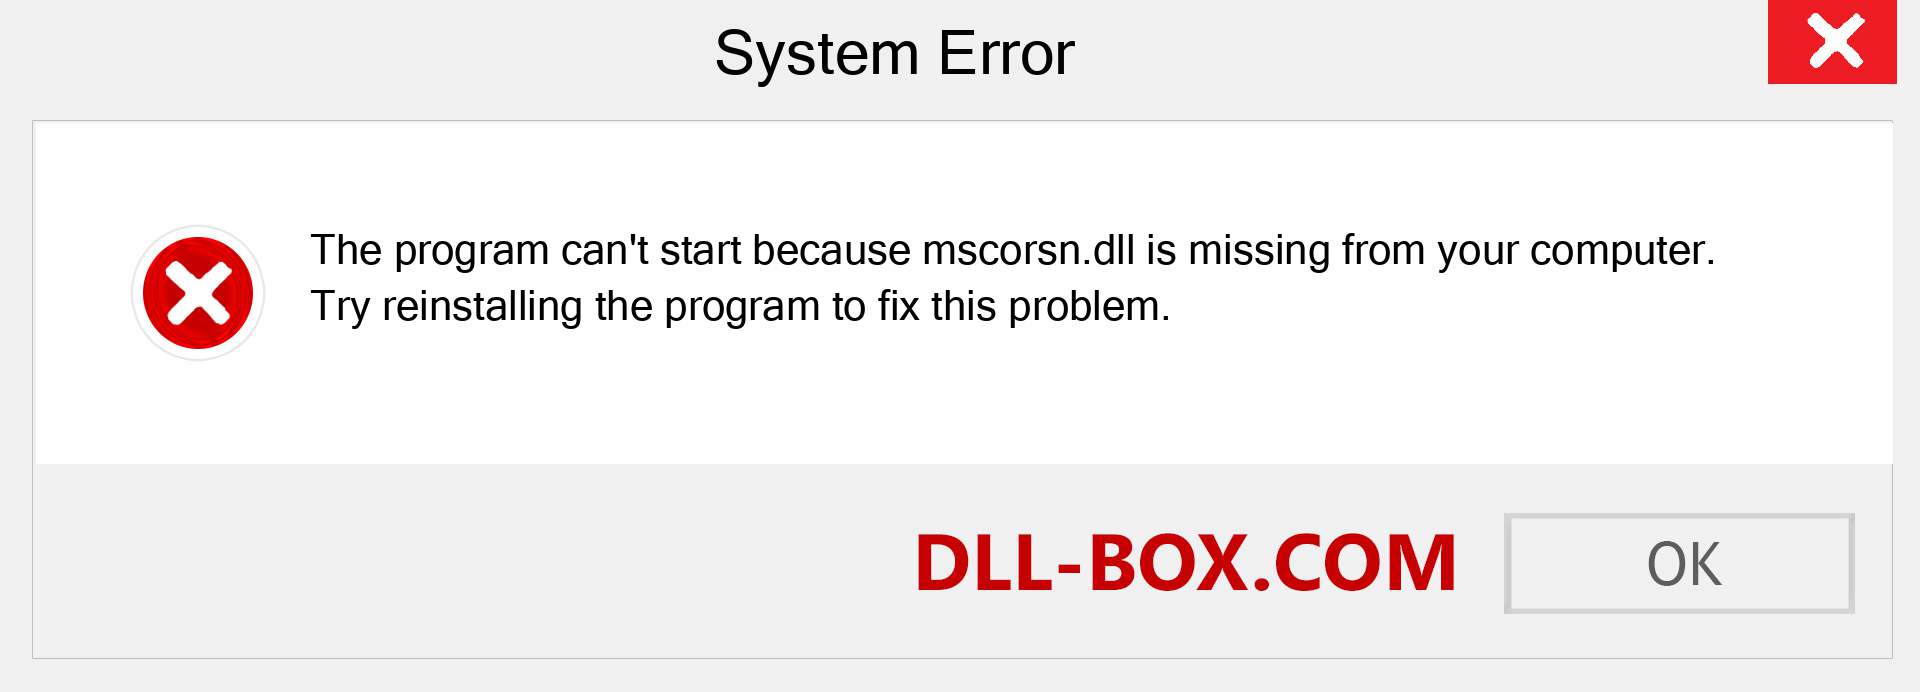  mscorsn.dll file is missing?. Download for Windows 7, 8, 10 - Fix  mscorsn dll Missing Error on Windows, photos, images